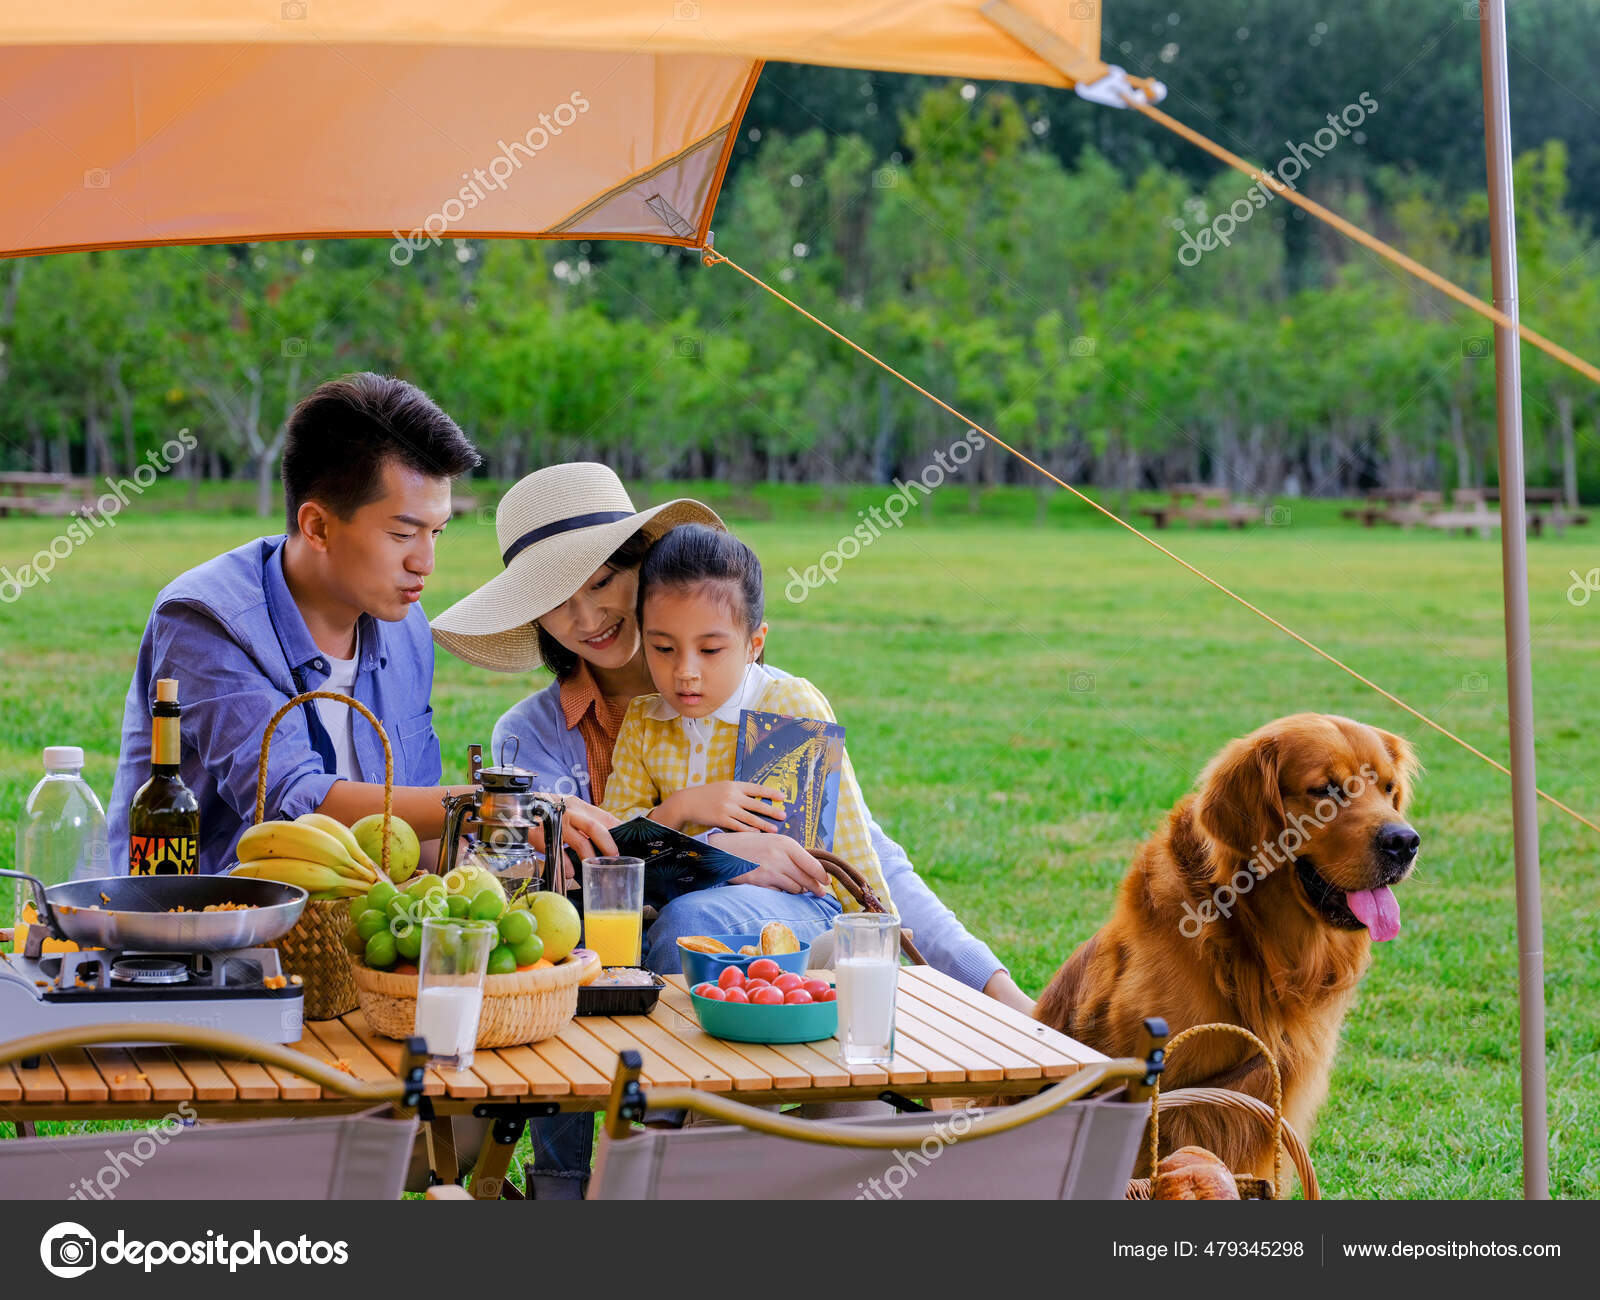 of　Happy　©eastfenceimage　outside　family　and　dog　reading　by　three　Photo　Stock　pet　479345298